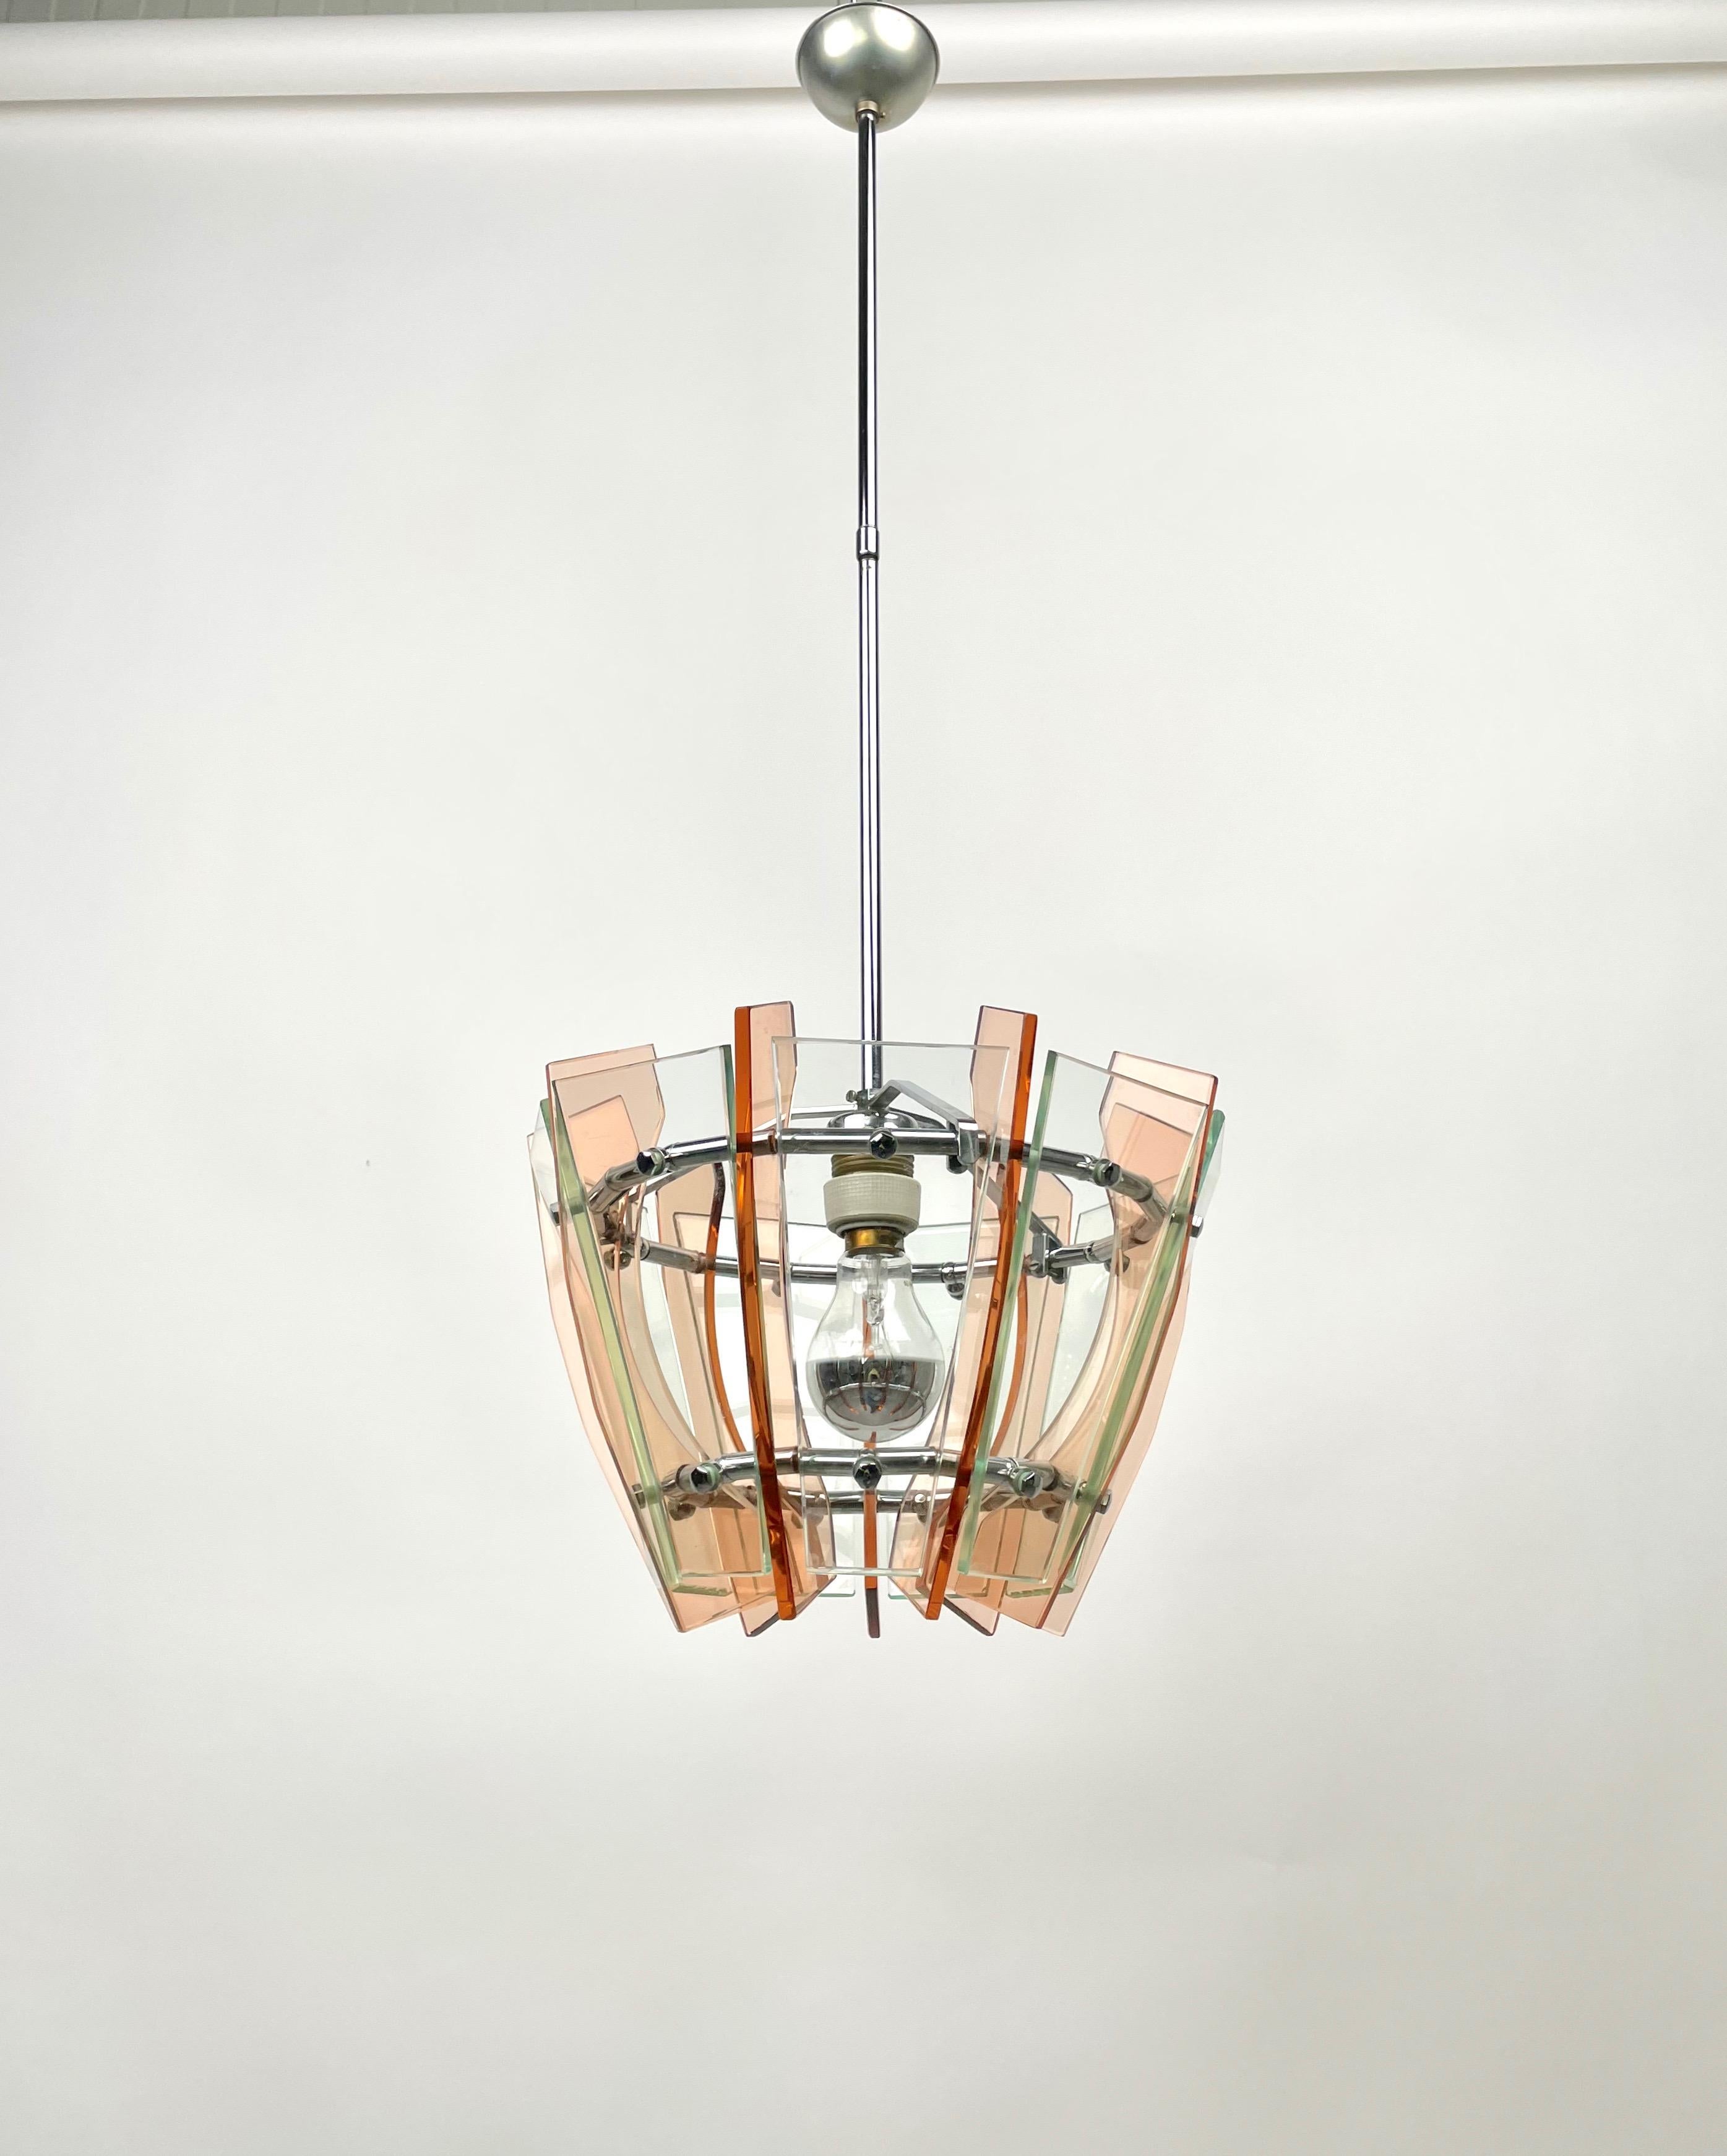 Chandelier pendant in colored glass (green & orange) and chrome by Veca, Italy, 1970s.

Measures: Height with pole: 80 cm
Height without pole: 23 cm.
Diameter: 32 cm.